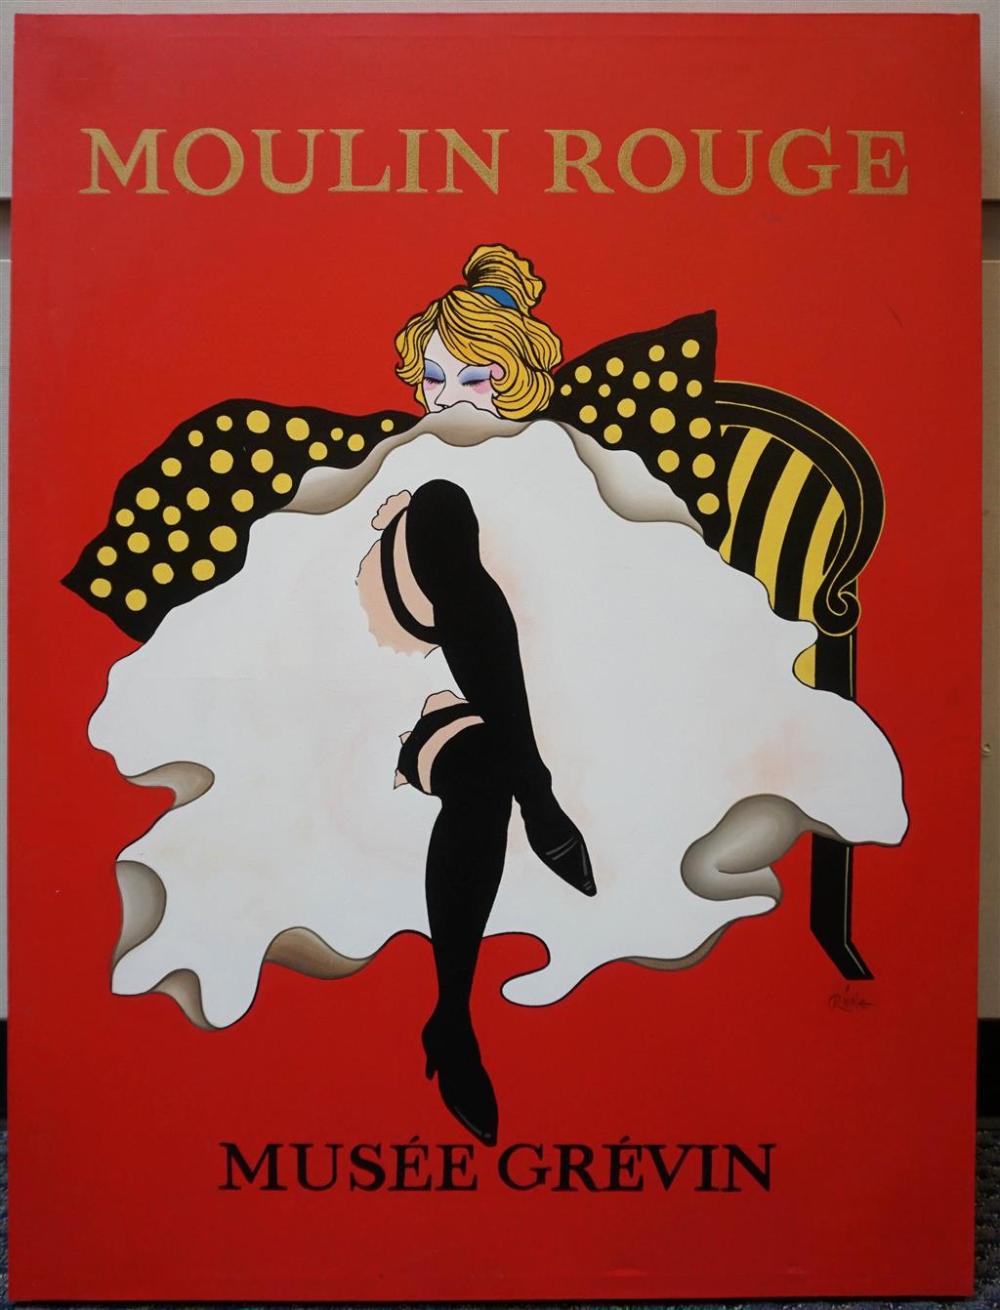 MOULIN ROGUE MUSEE GREVIN PRINT 326bbd